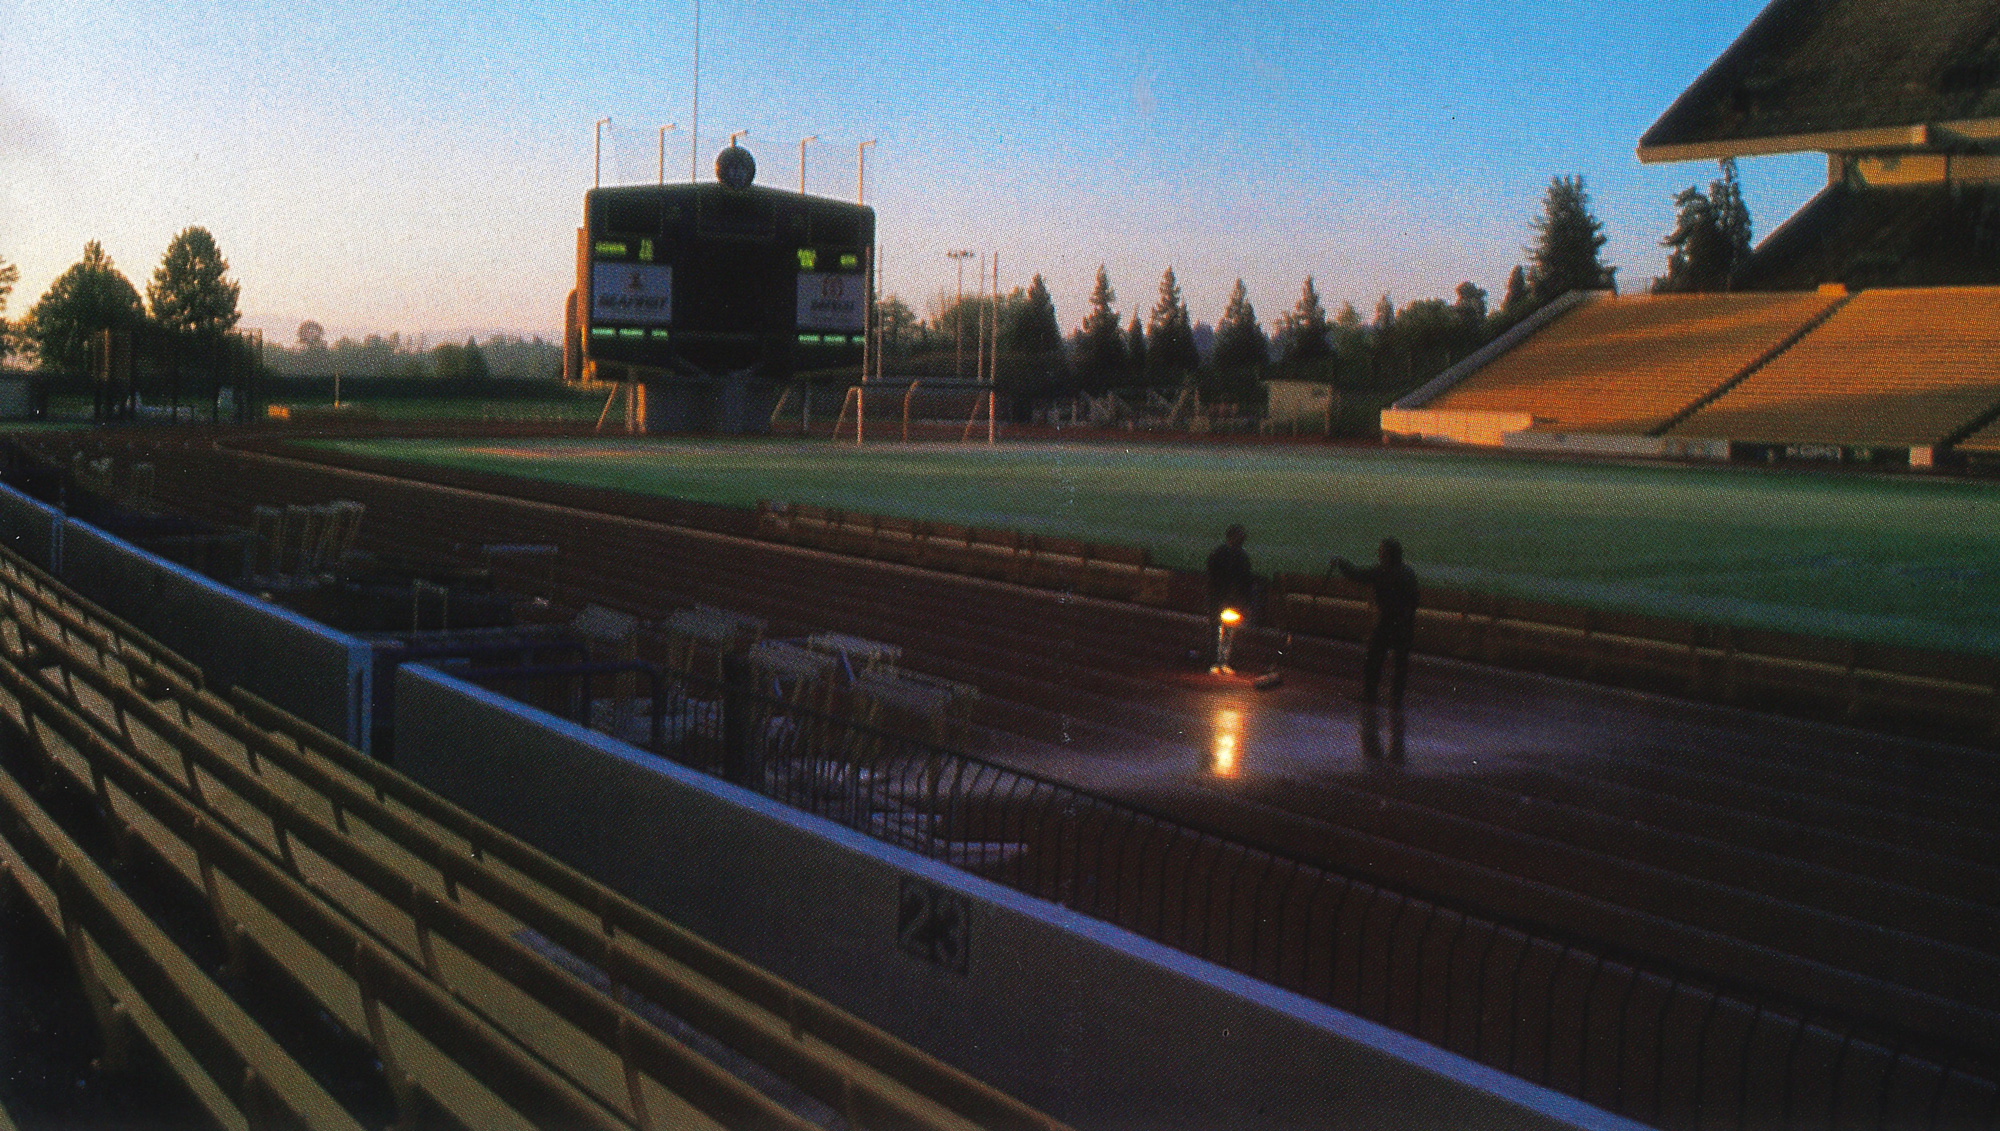 Two people shining flashlights on an athletic track early in the morning